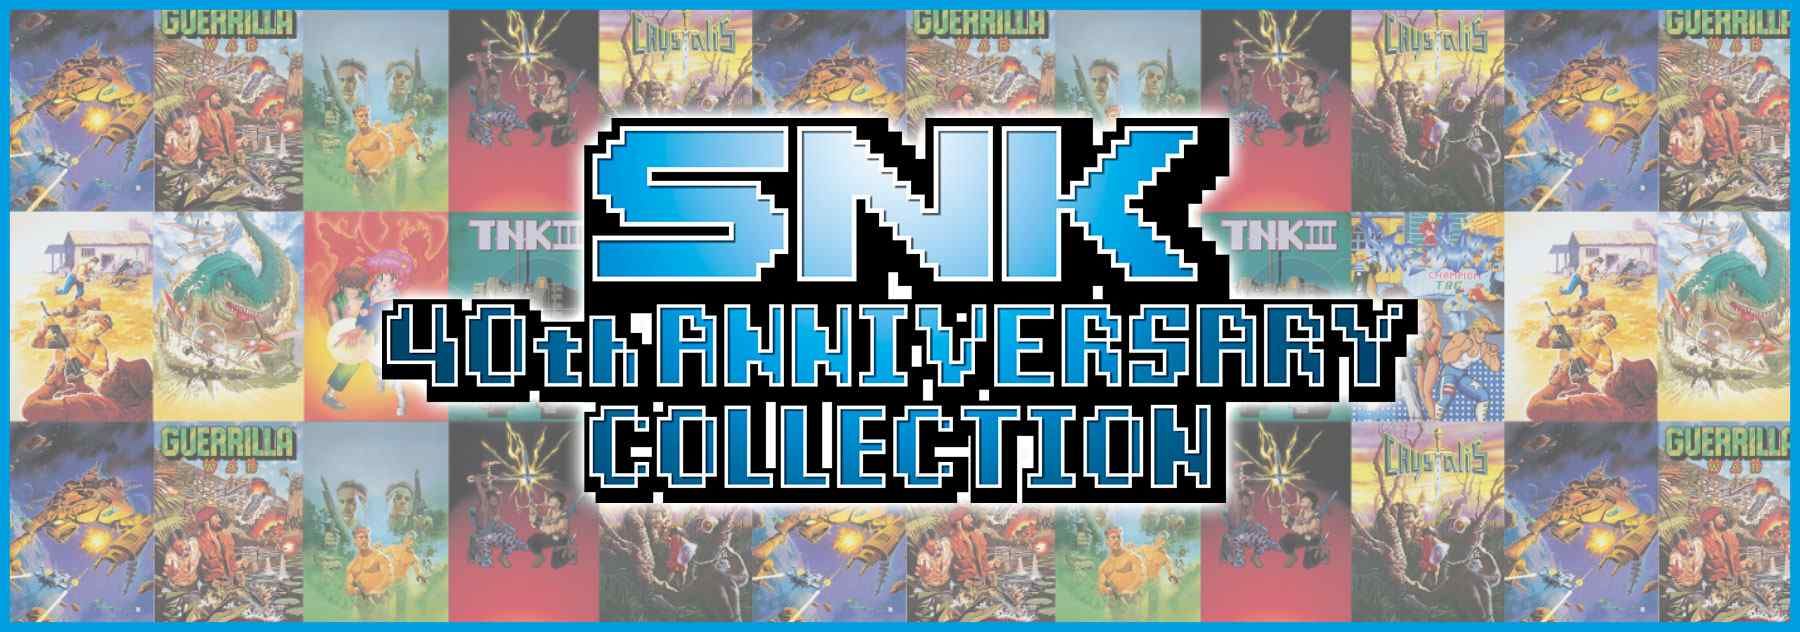 snk_40th_annversary_collection